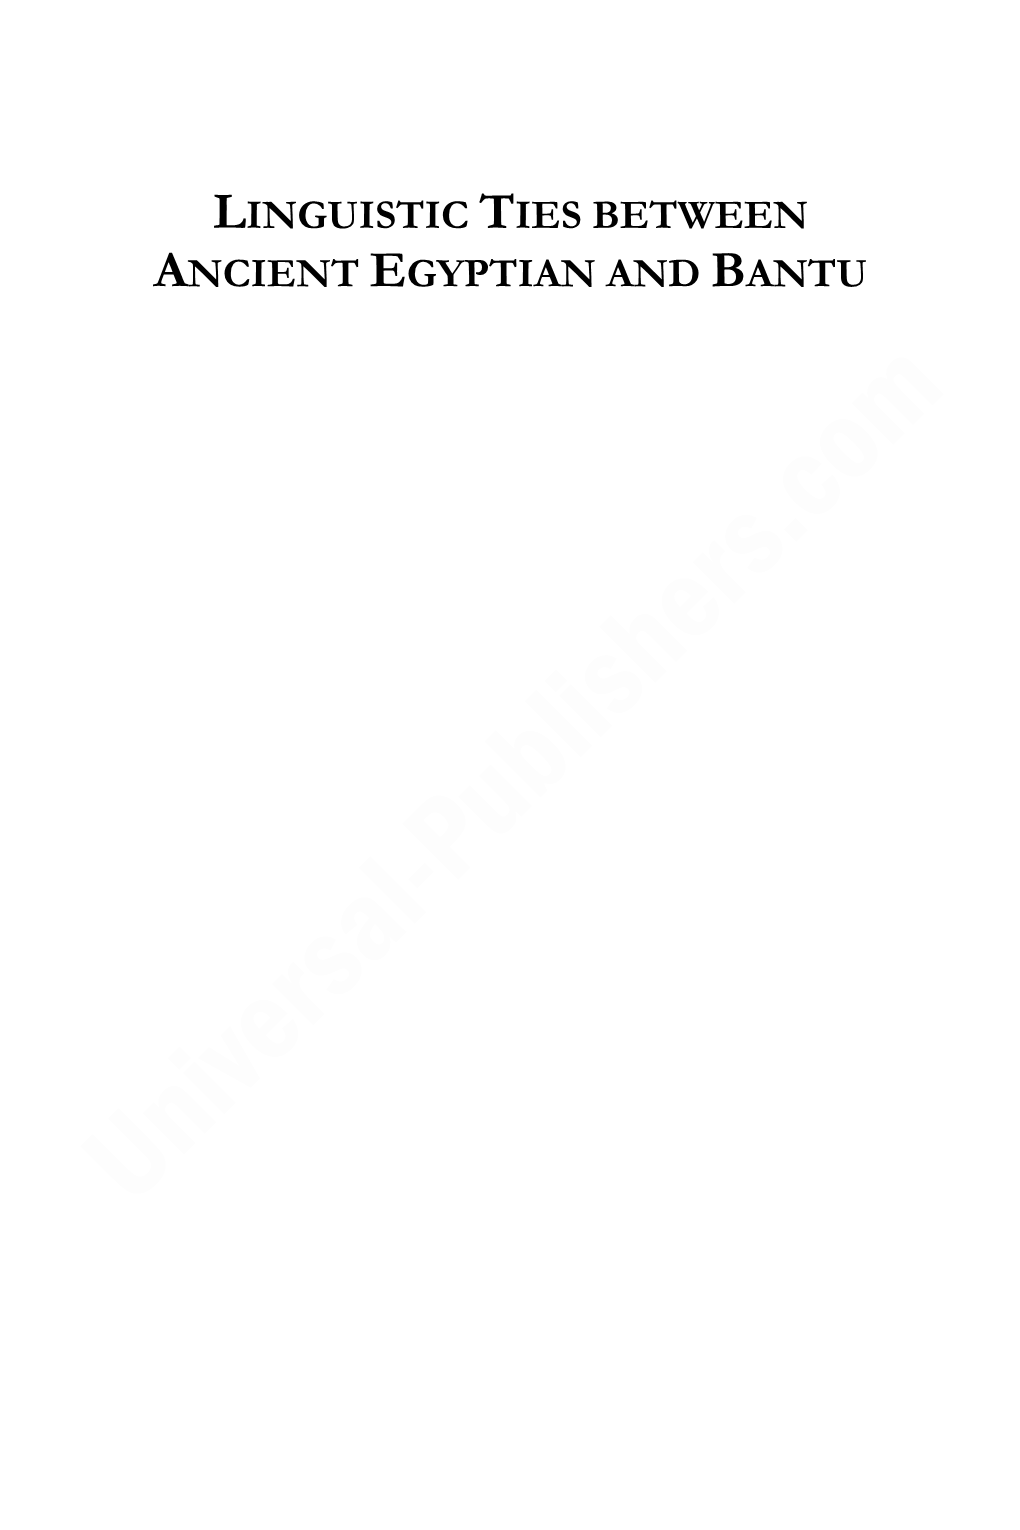 Linguistic Ties Between Ancient Egyptian and Bantu